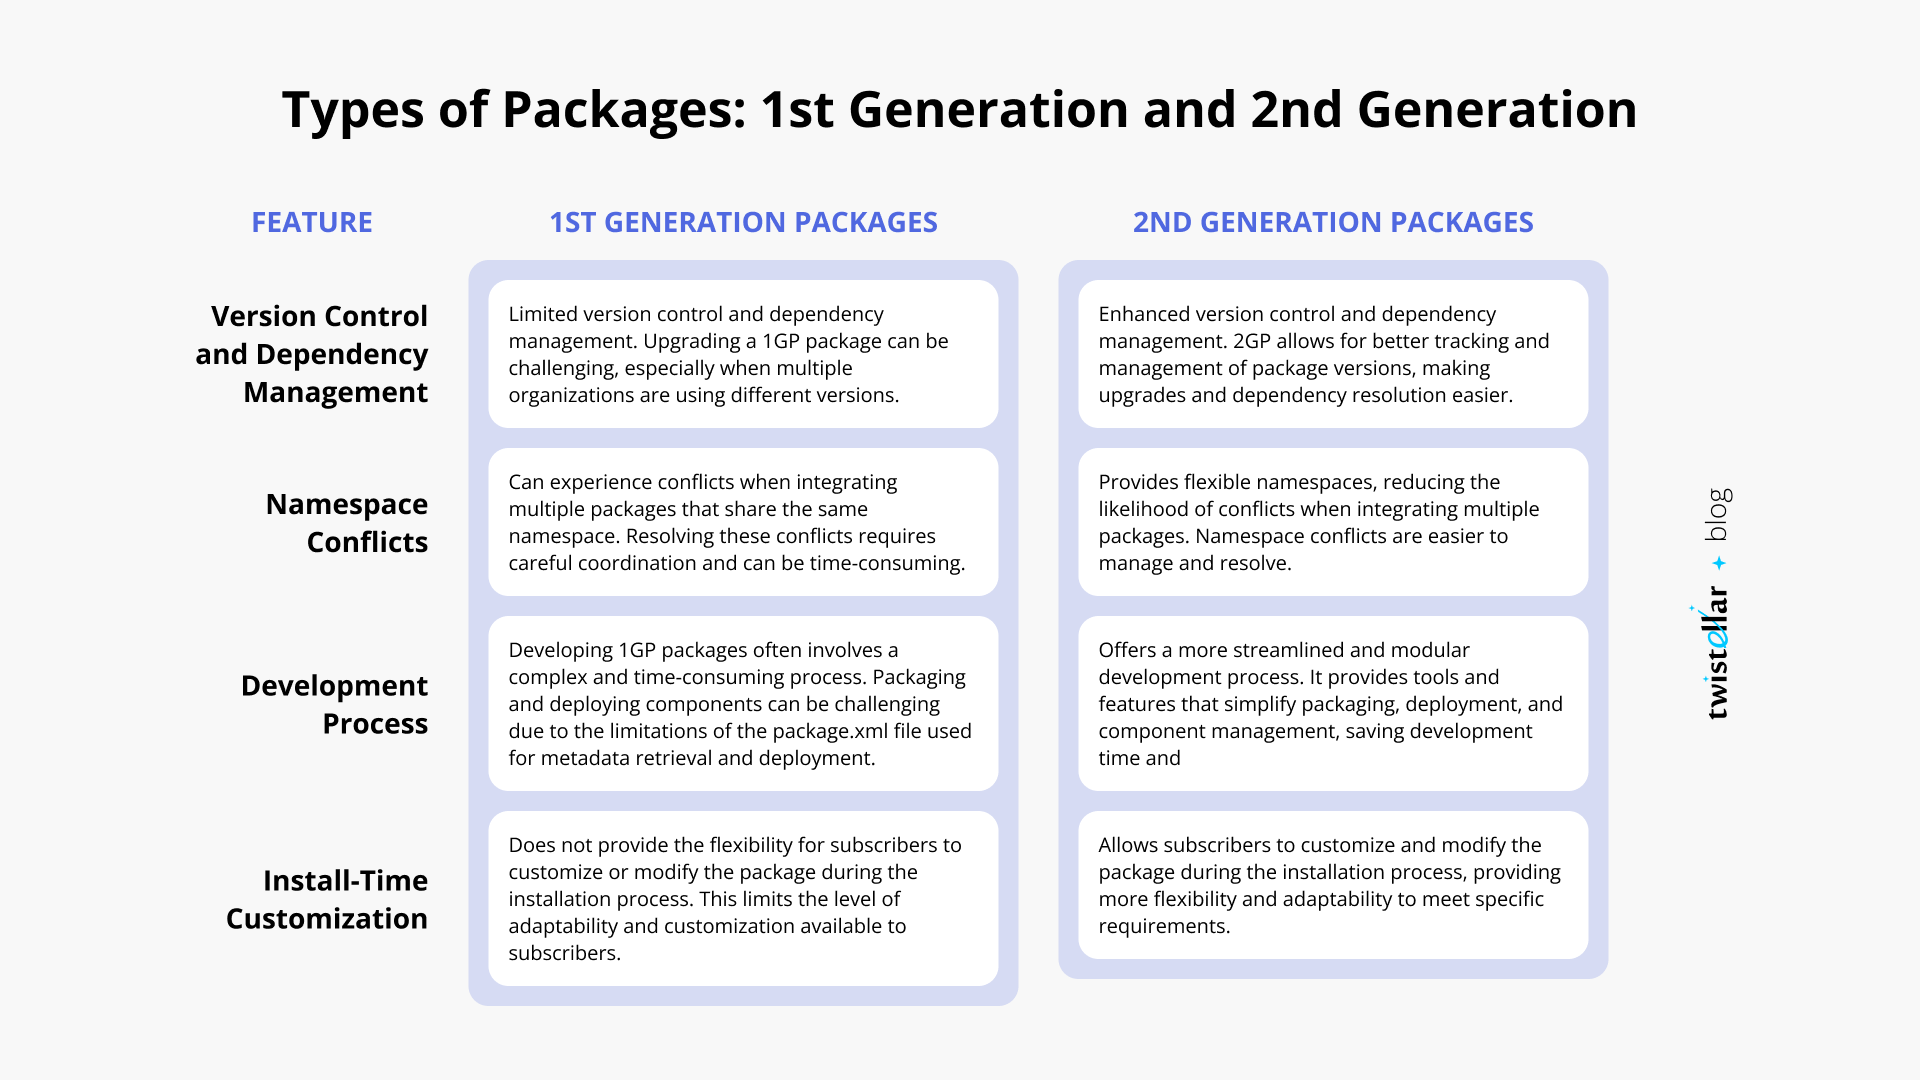 Comparison of 1st Generation Packages (1GP) and 2nd Generation Packages (2GP)